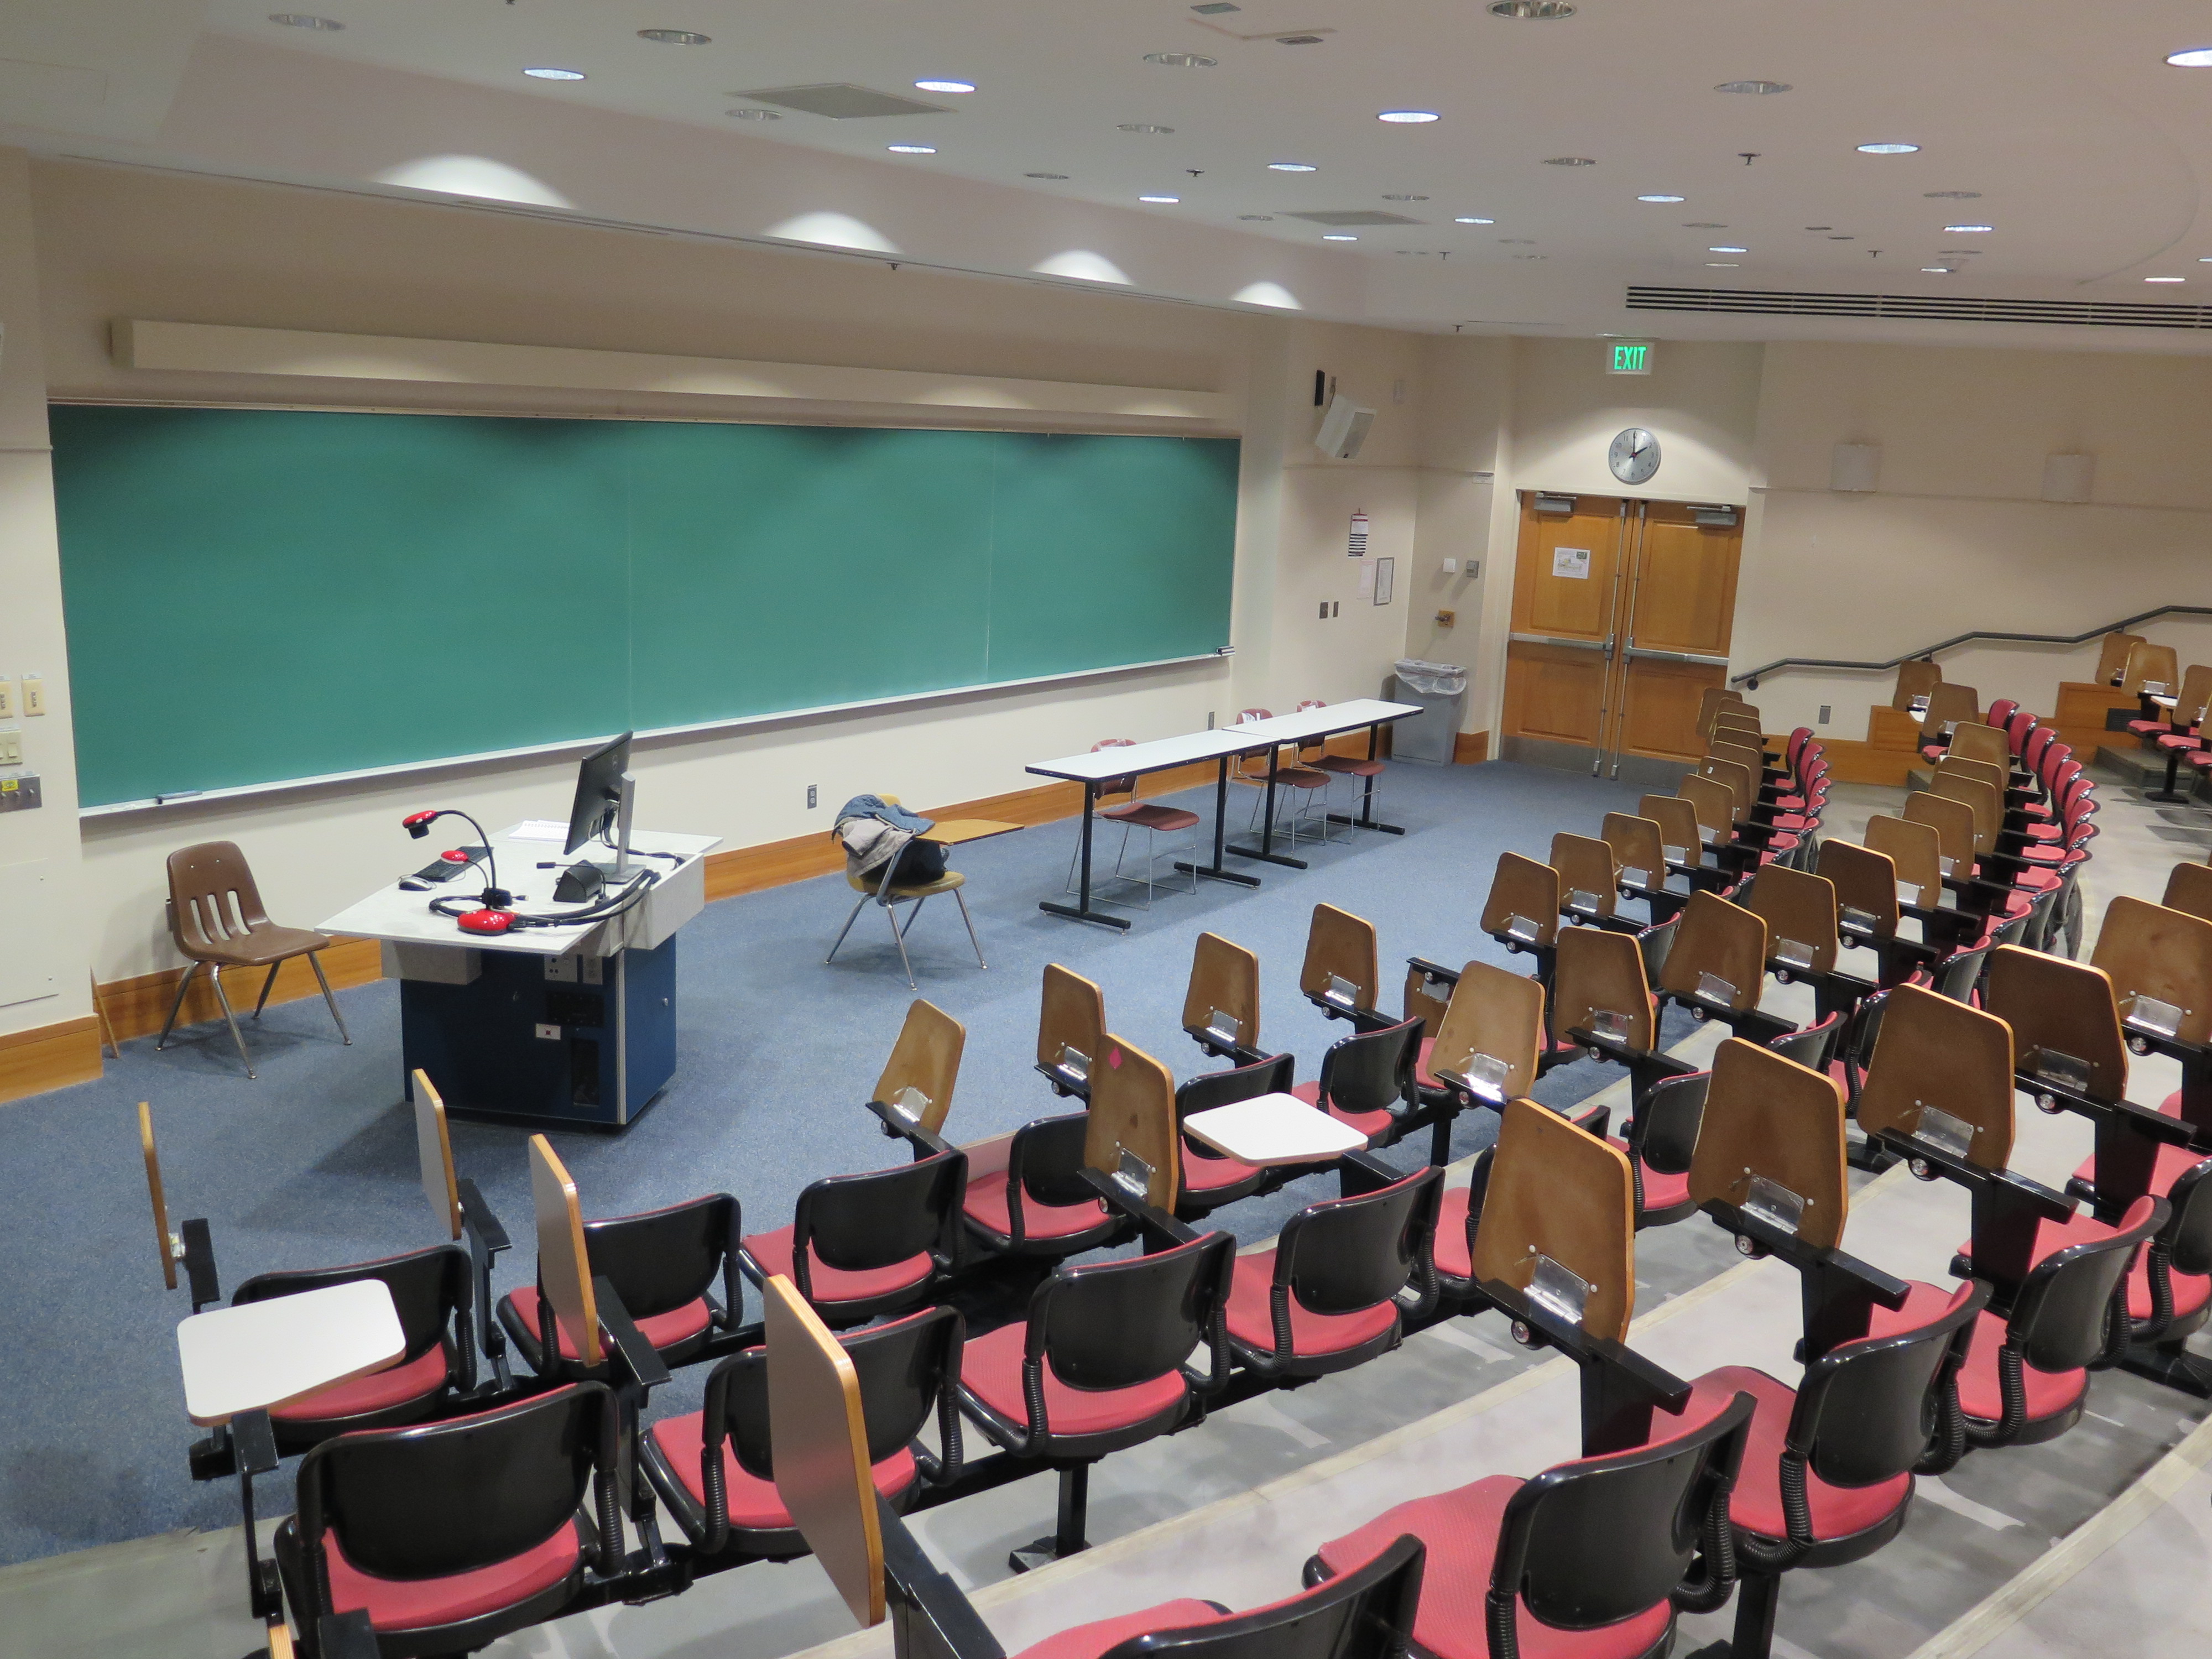 Room Consists of auditorium style, stationary tablet armchairs, White board and podium are located at the front of the room.